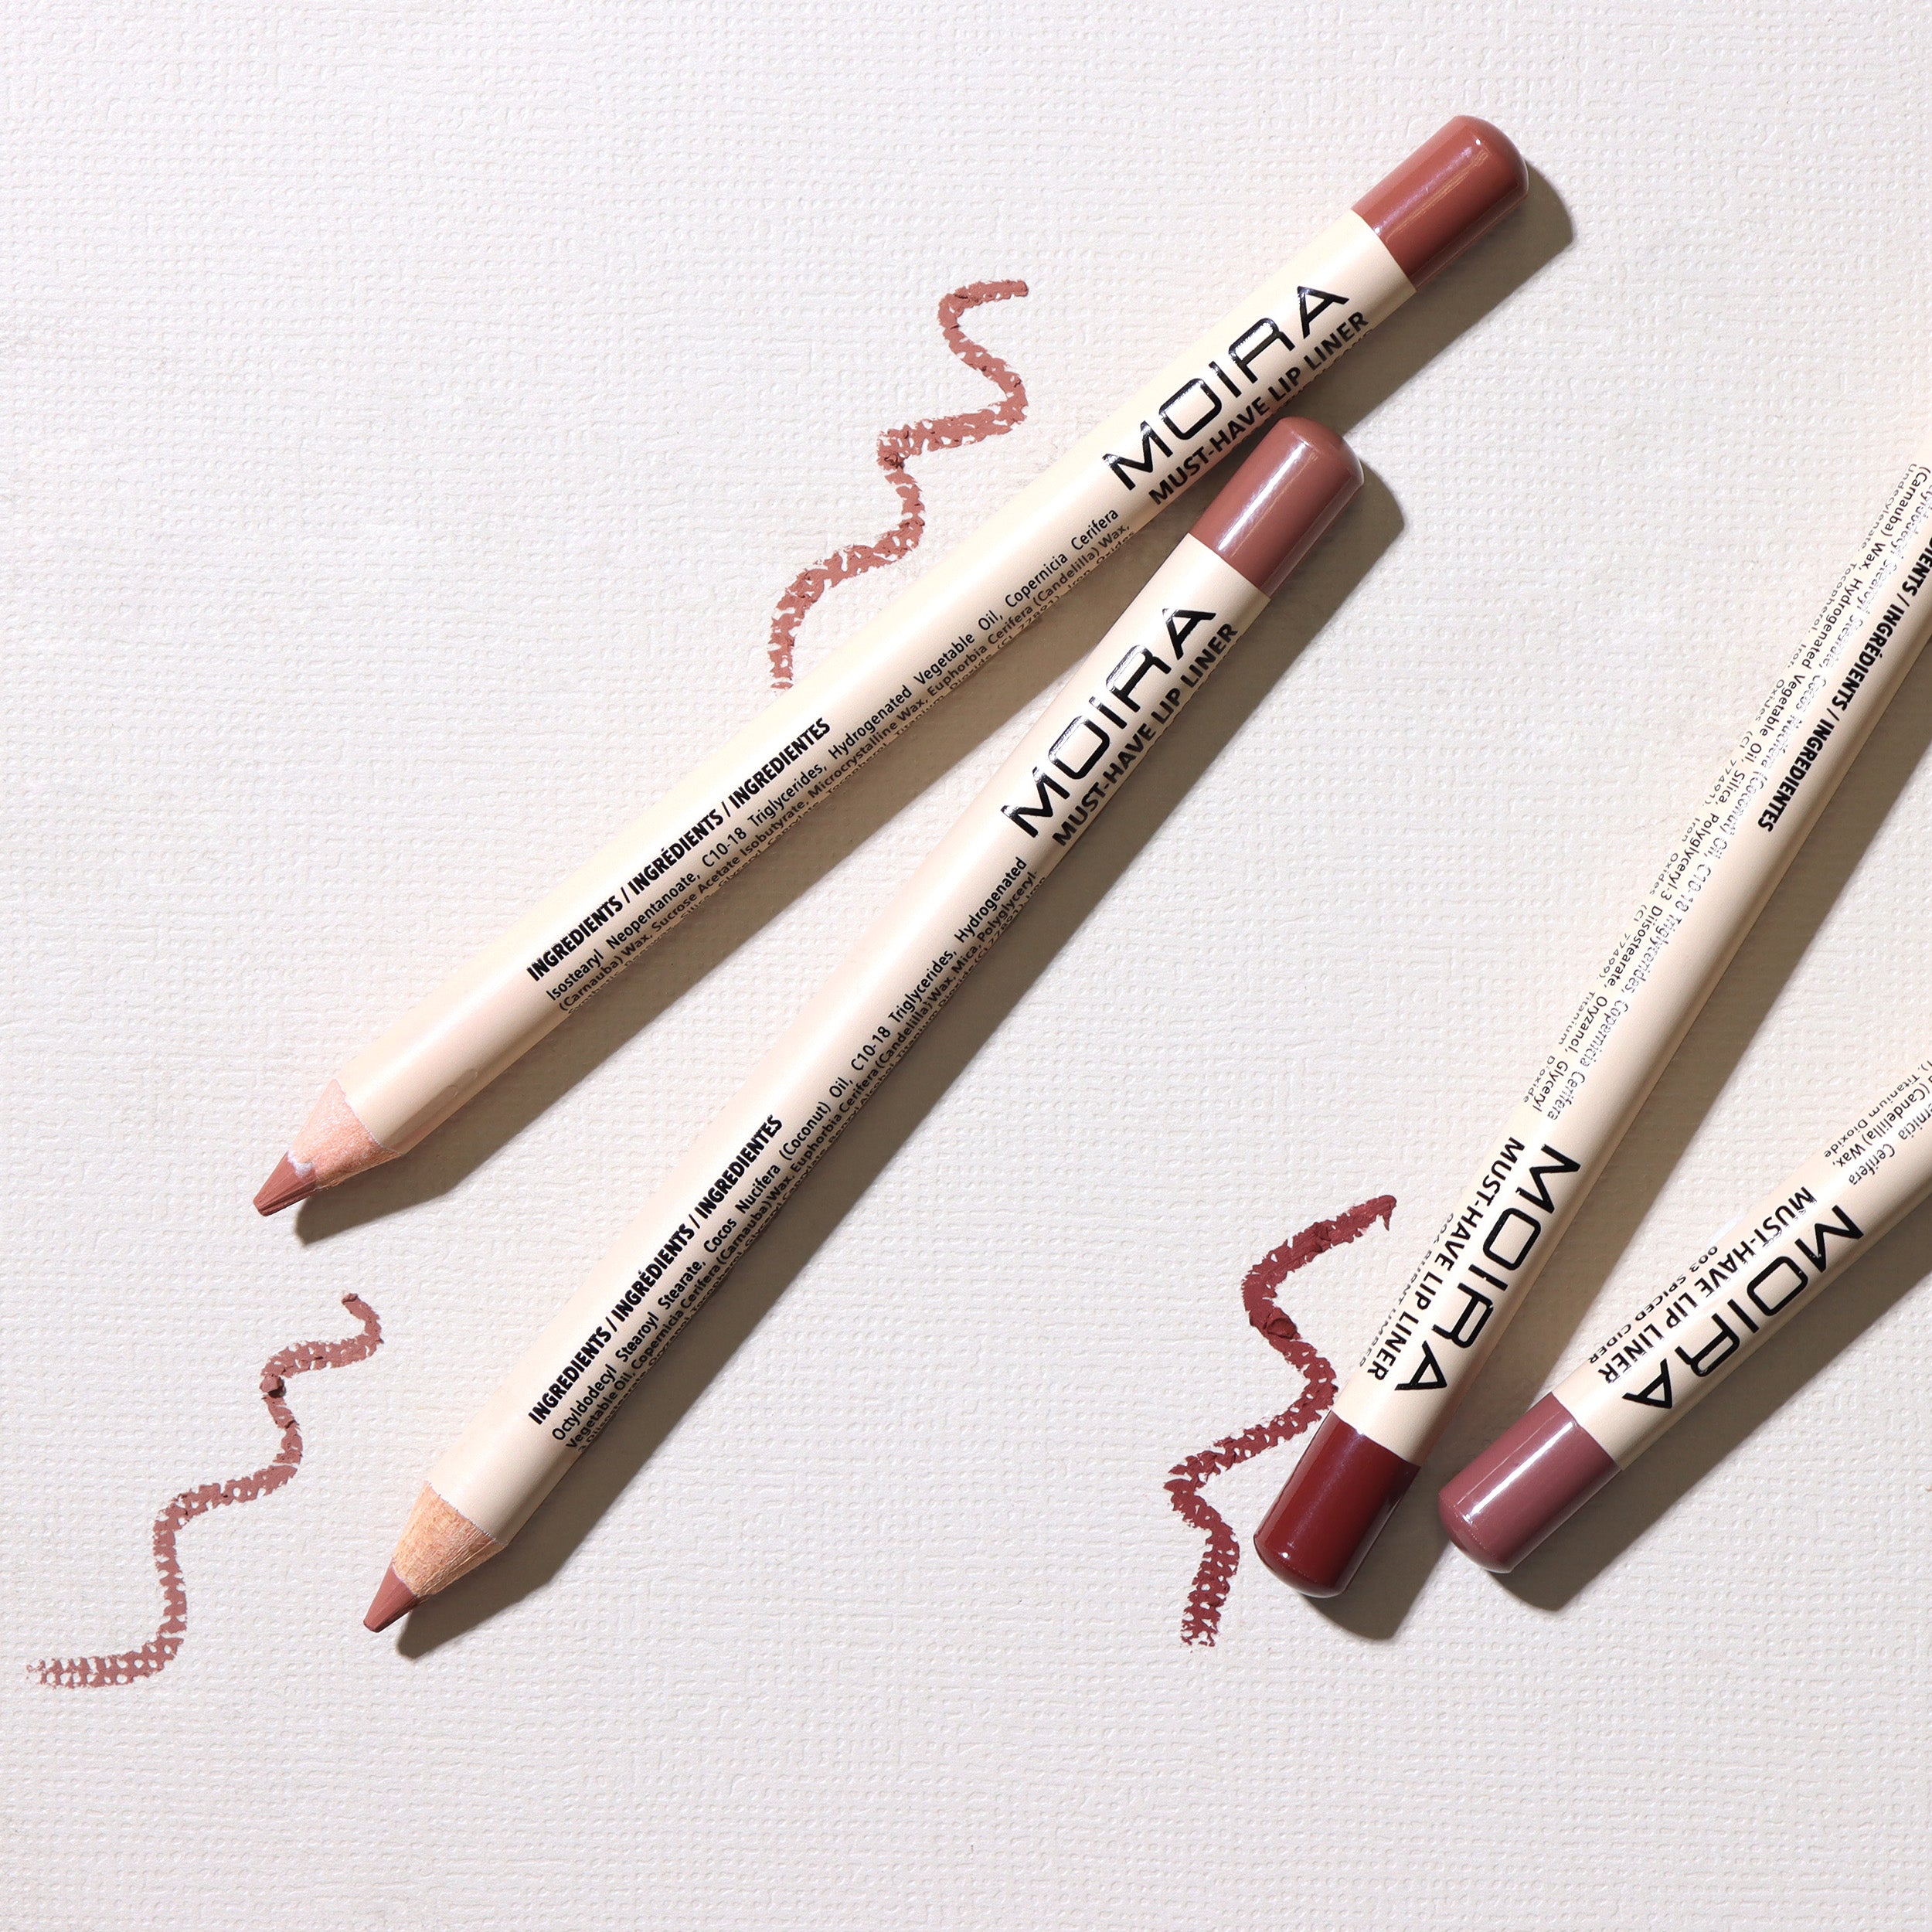 Must-Have Lip Liner (004, Warm Toast)